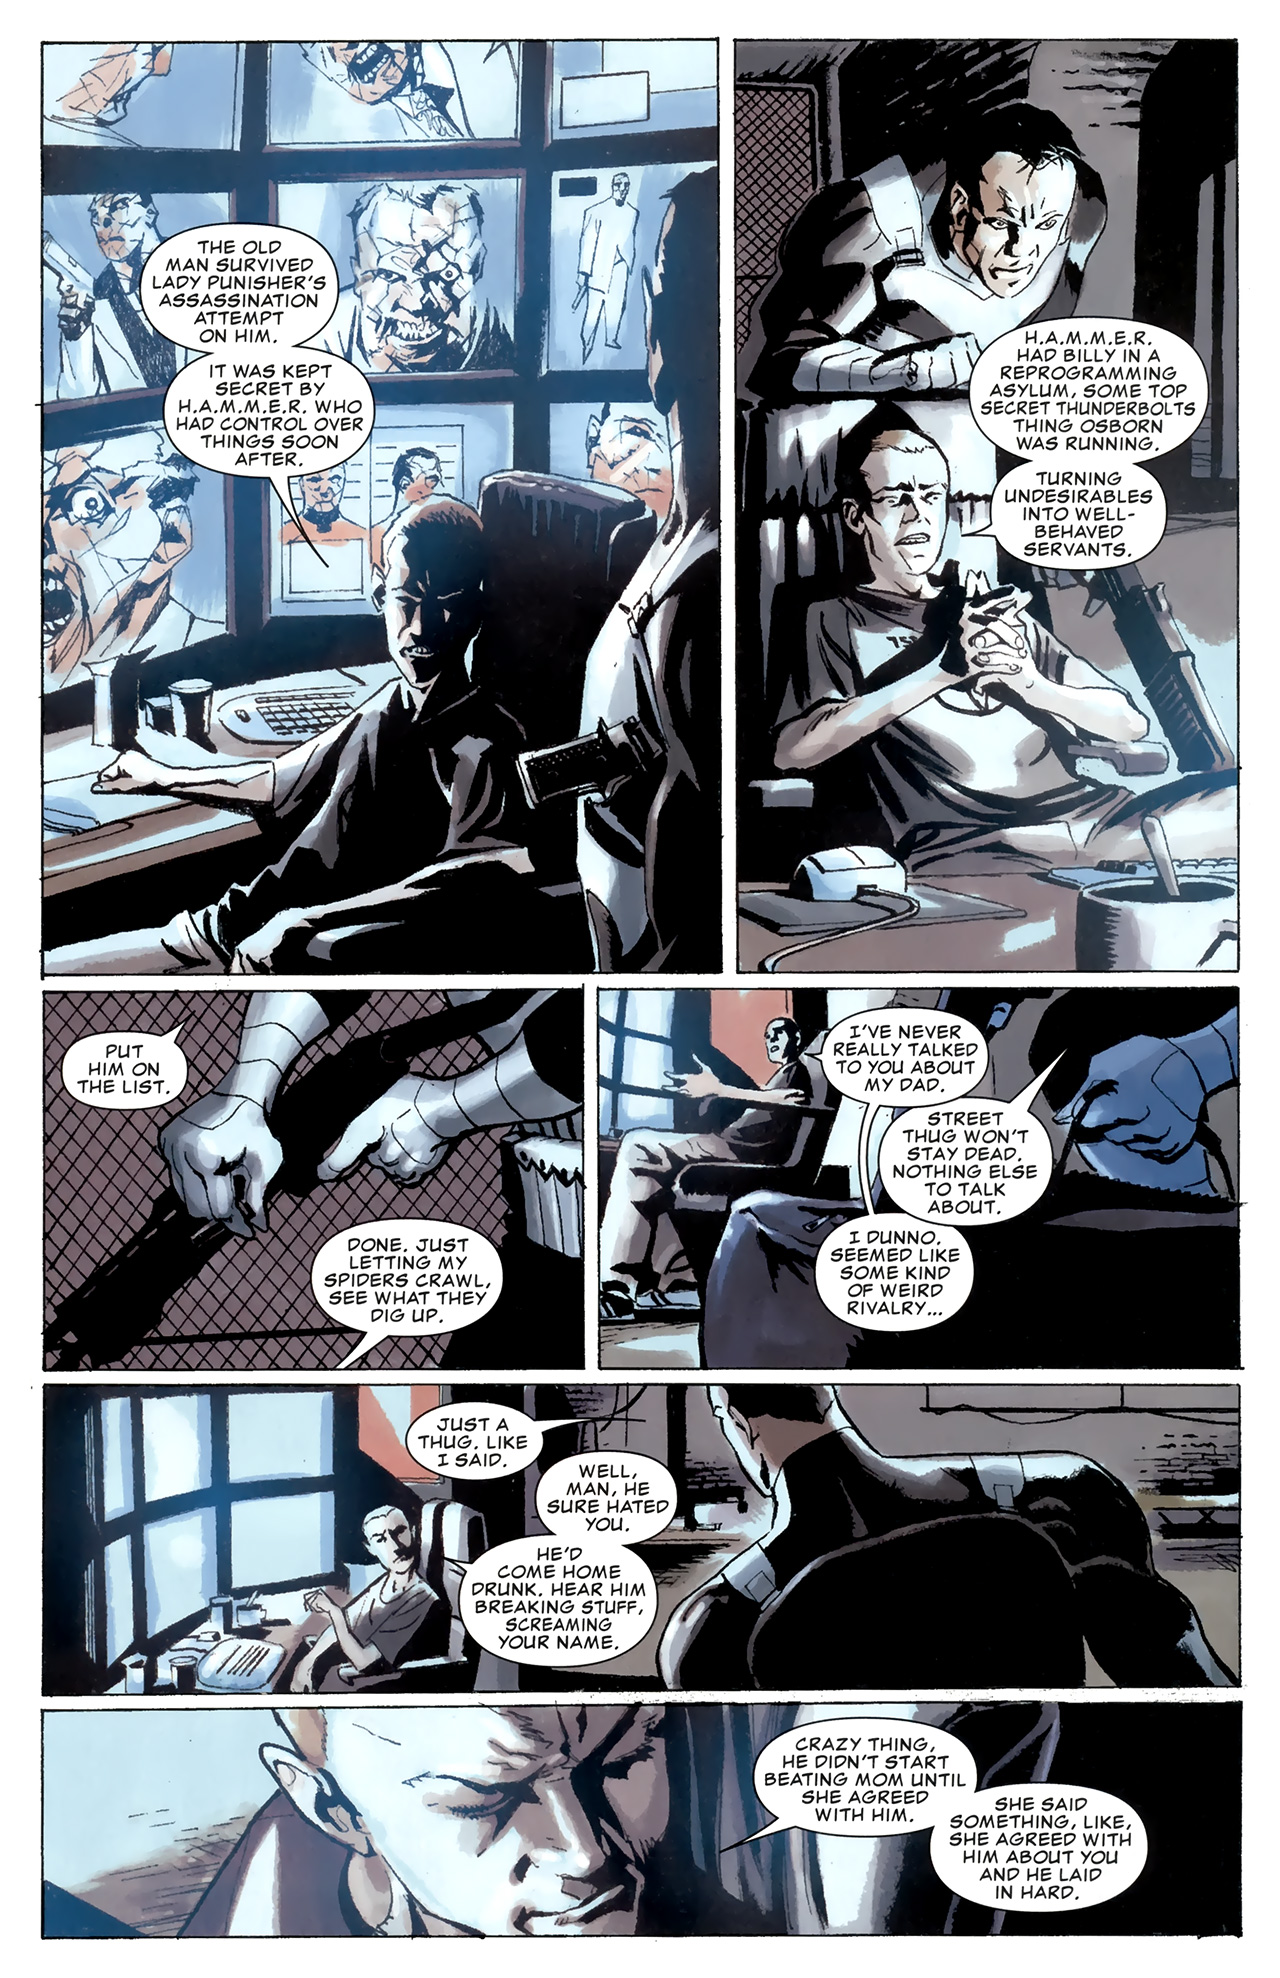 Punisher: In The Blood #1 - In The Blood, Part One